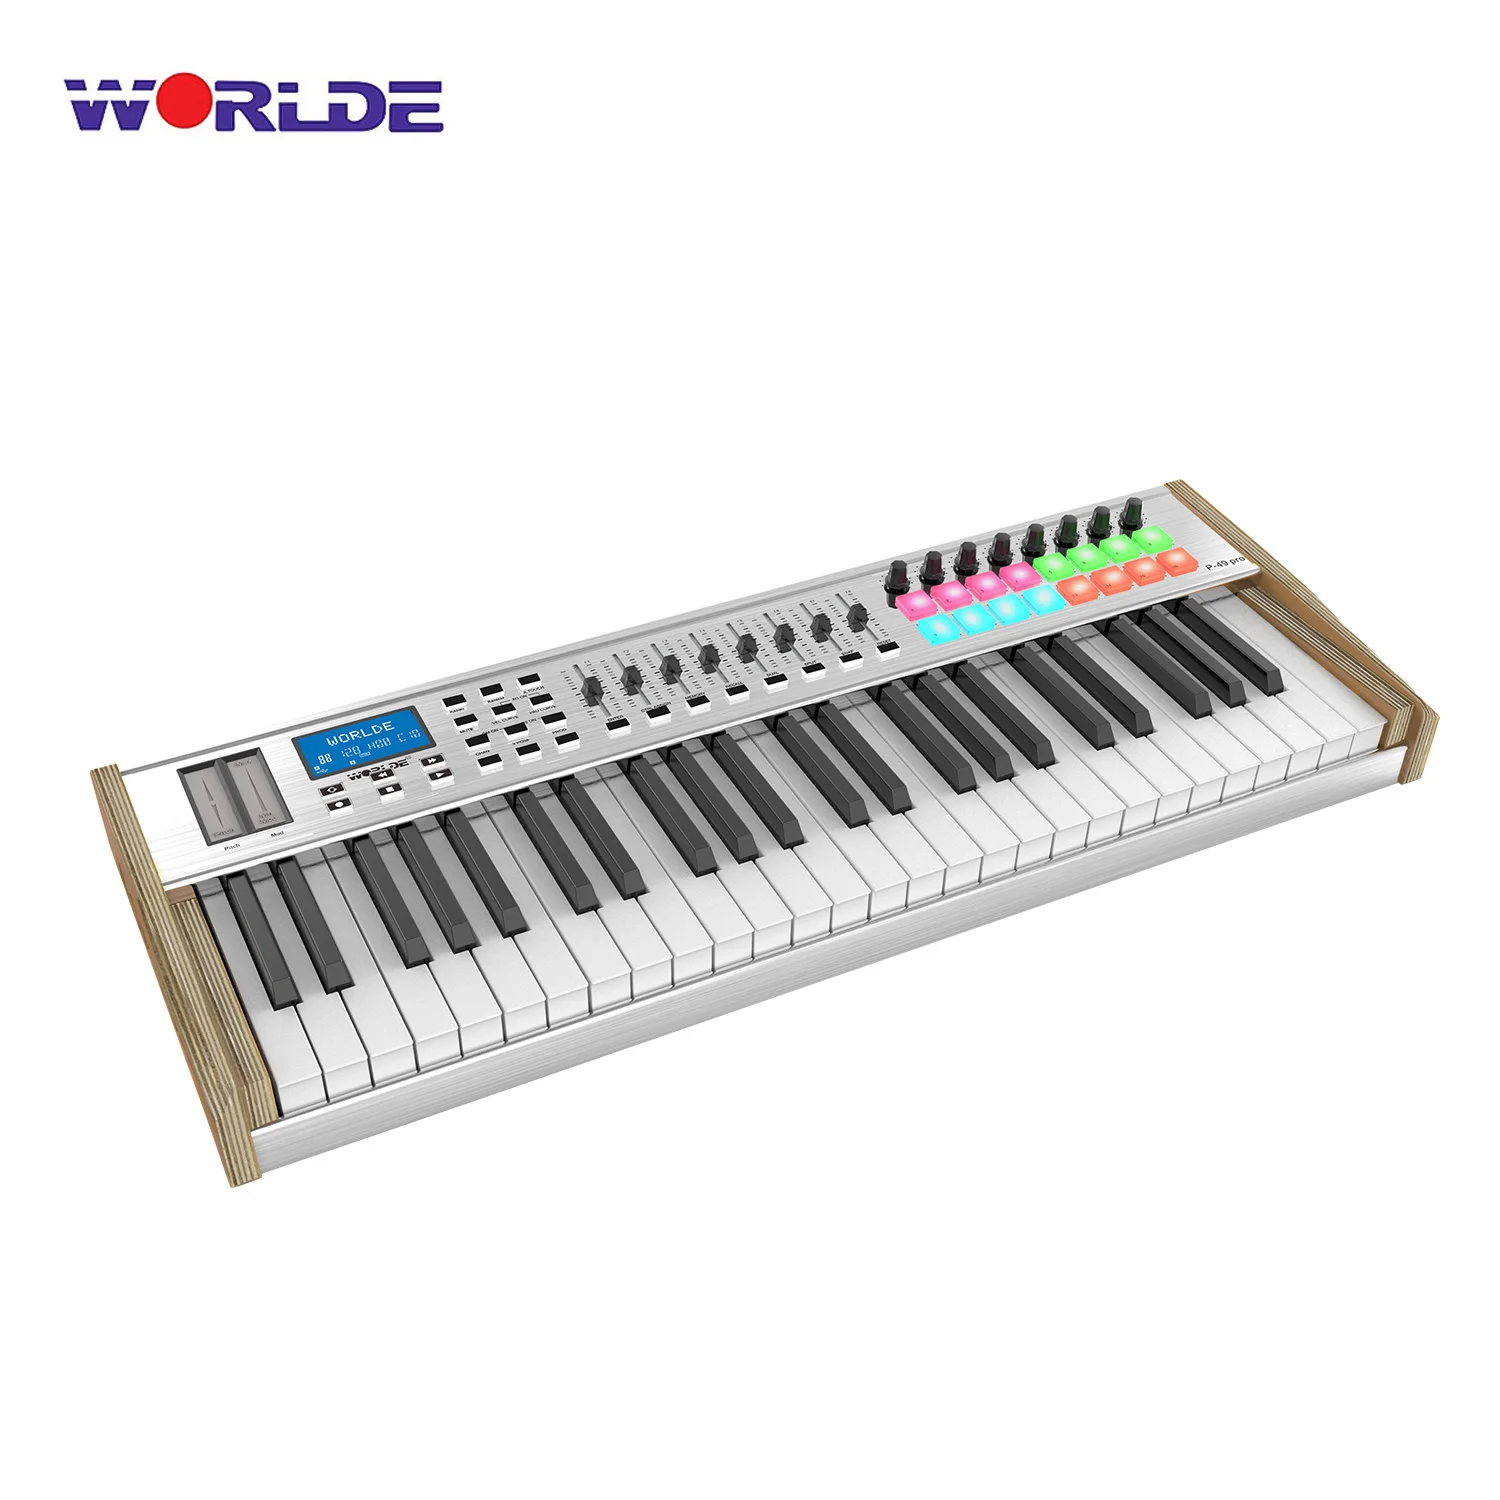 

WORLDE P-49 Pro MIDI Keyboard Controller Midi Controller 49-Key USB LCD with 49 Semi-weighted Keys 16 RGB Backlit Trigger Pads